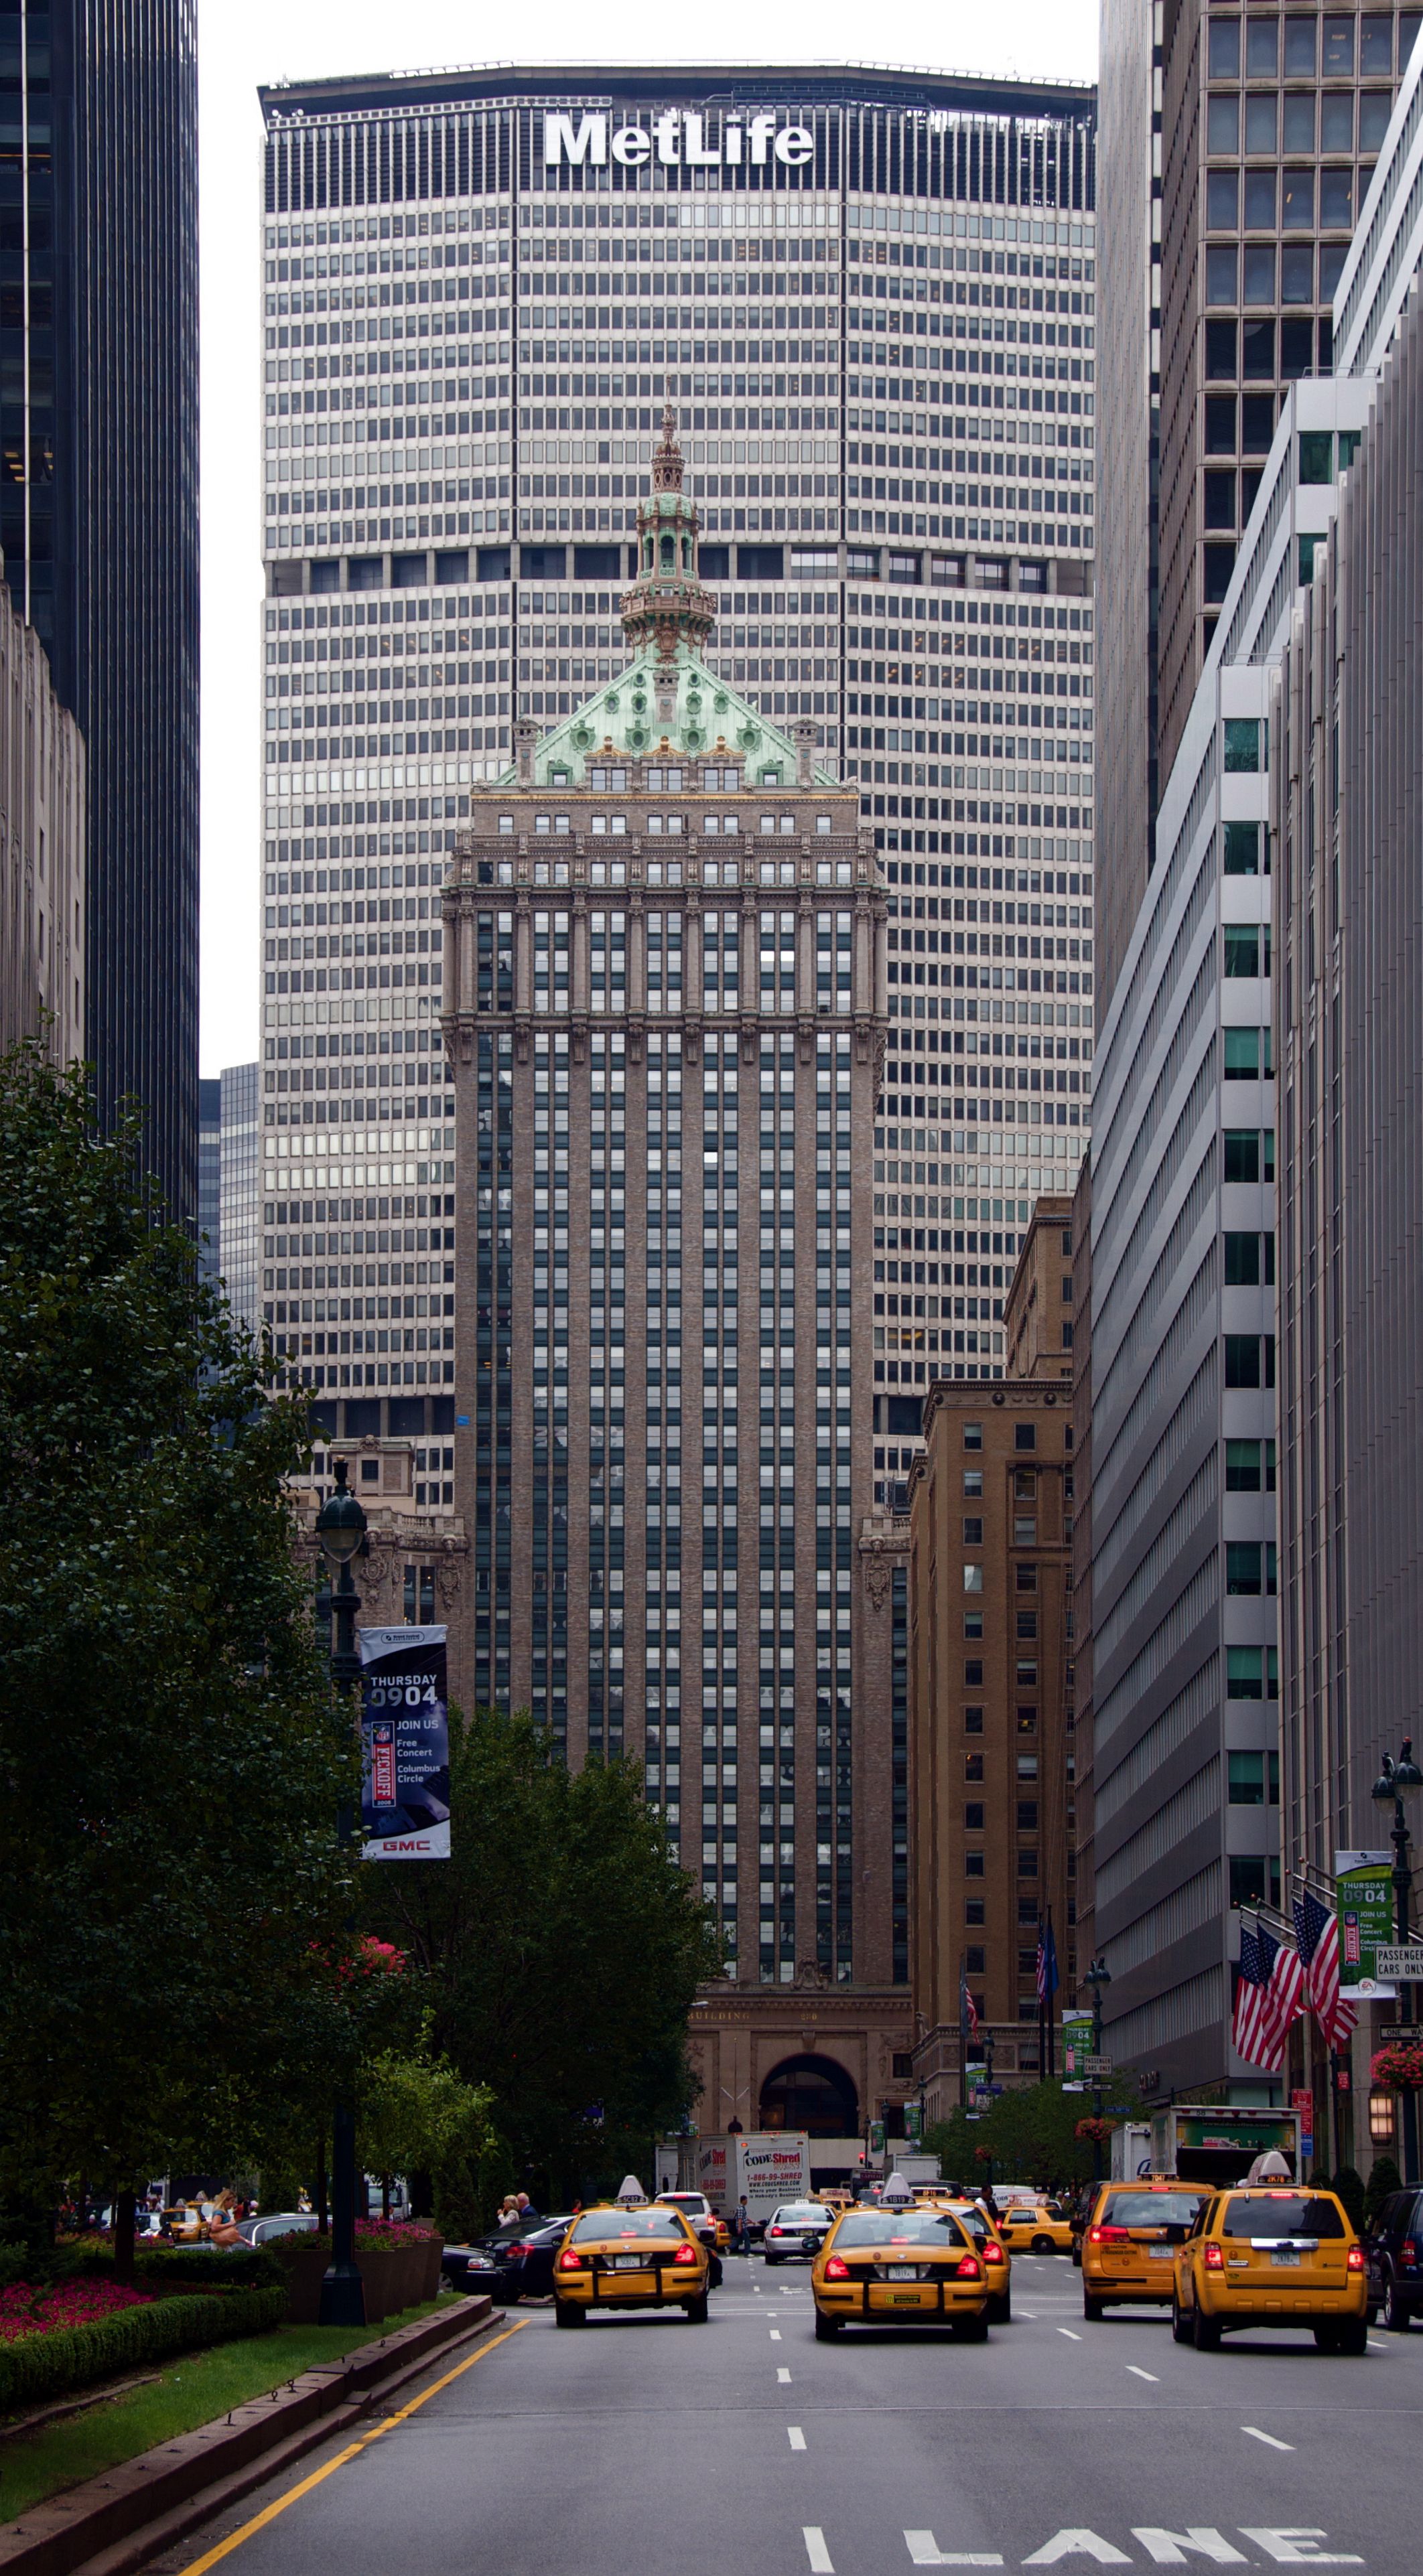 Park_Avenue_directly_heading_for_Helmsley_Building_and_Met_Life_Building.jpg